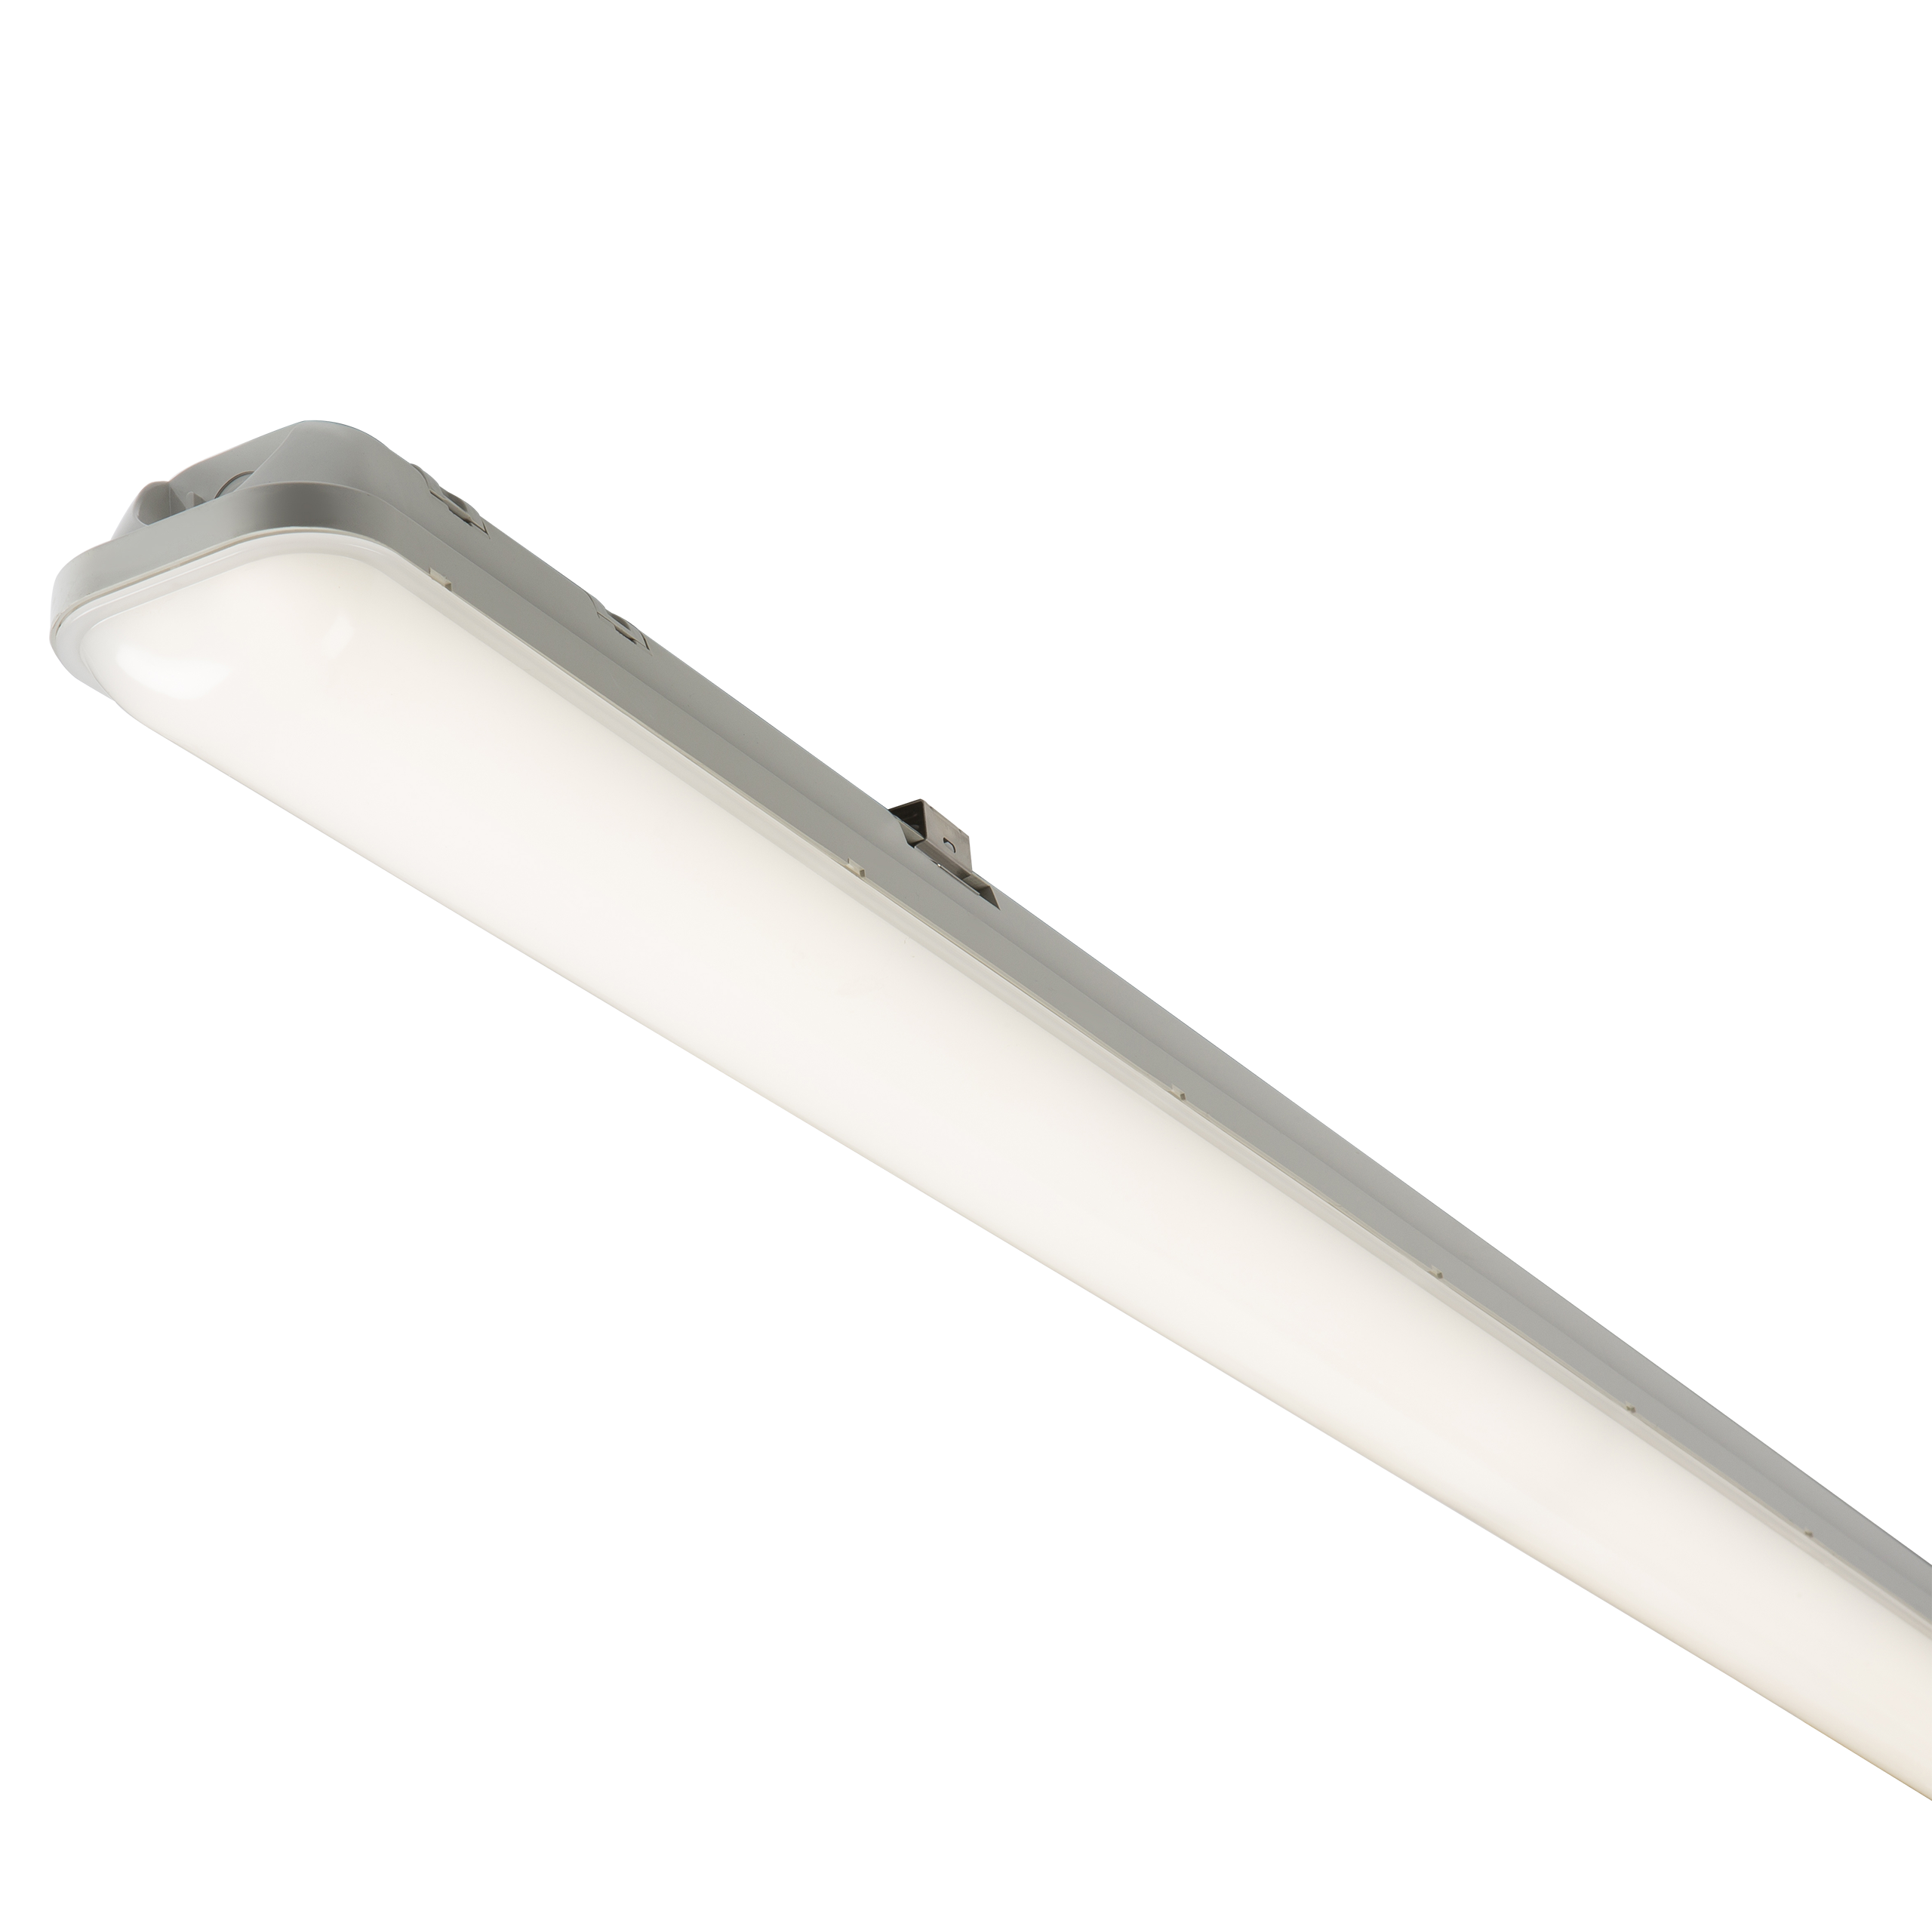 230V IP65 5ft 60W LED Non-Corrosive Fitting With Microwave Sensor- 1480mm - NCLED60S 